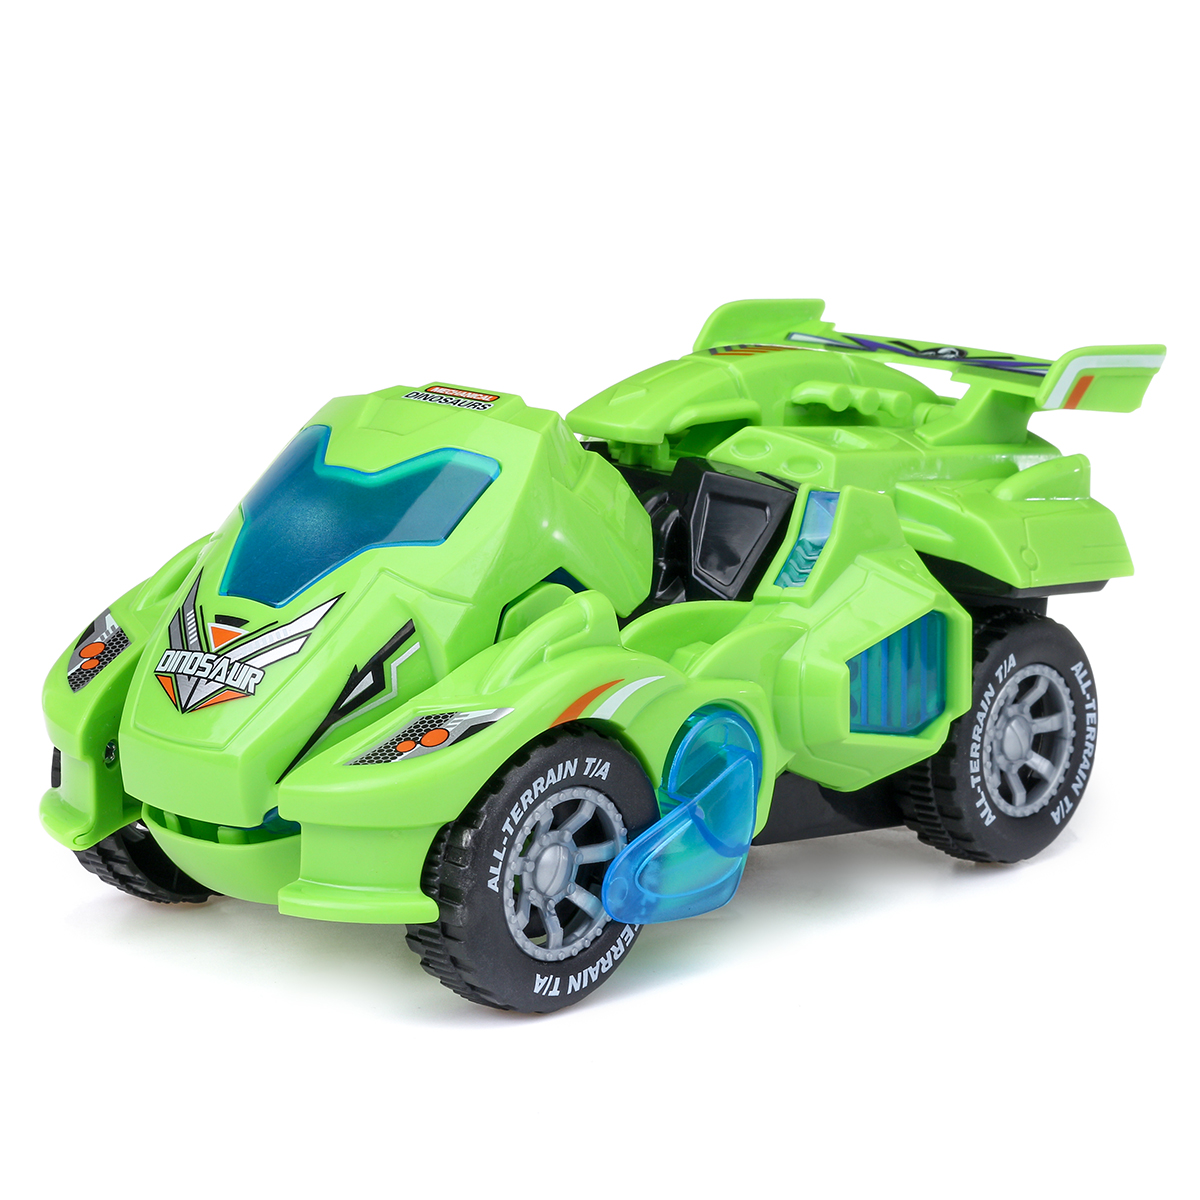 Creative-Dinosaur-Deformation-Toy-Car-Puzzle-Dinosaur-Electric-Toy-Car-Light-and-Music-Electric-Defo-1757309-12